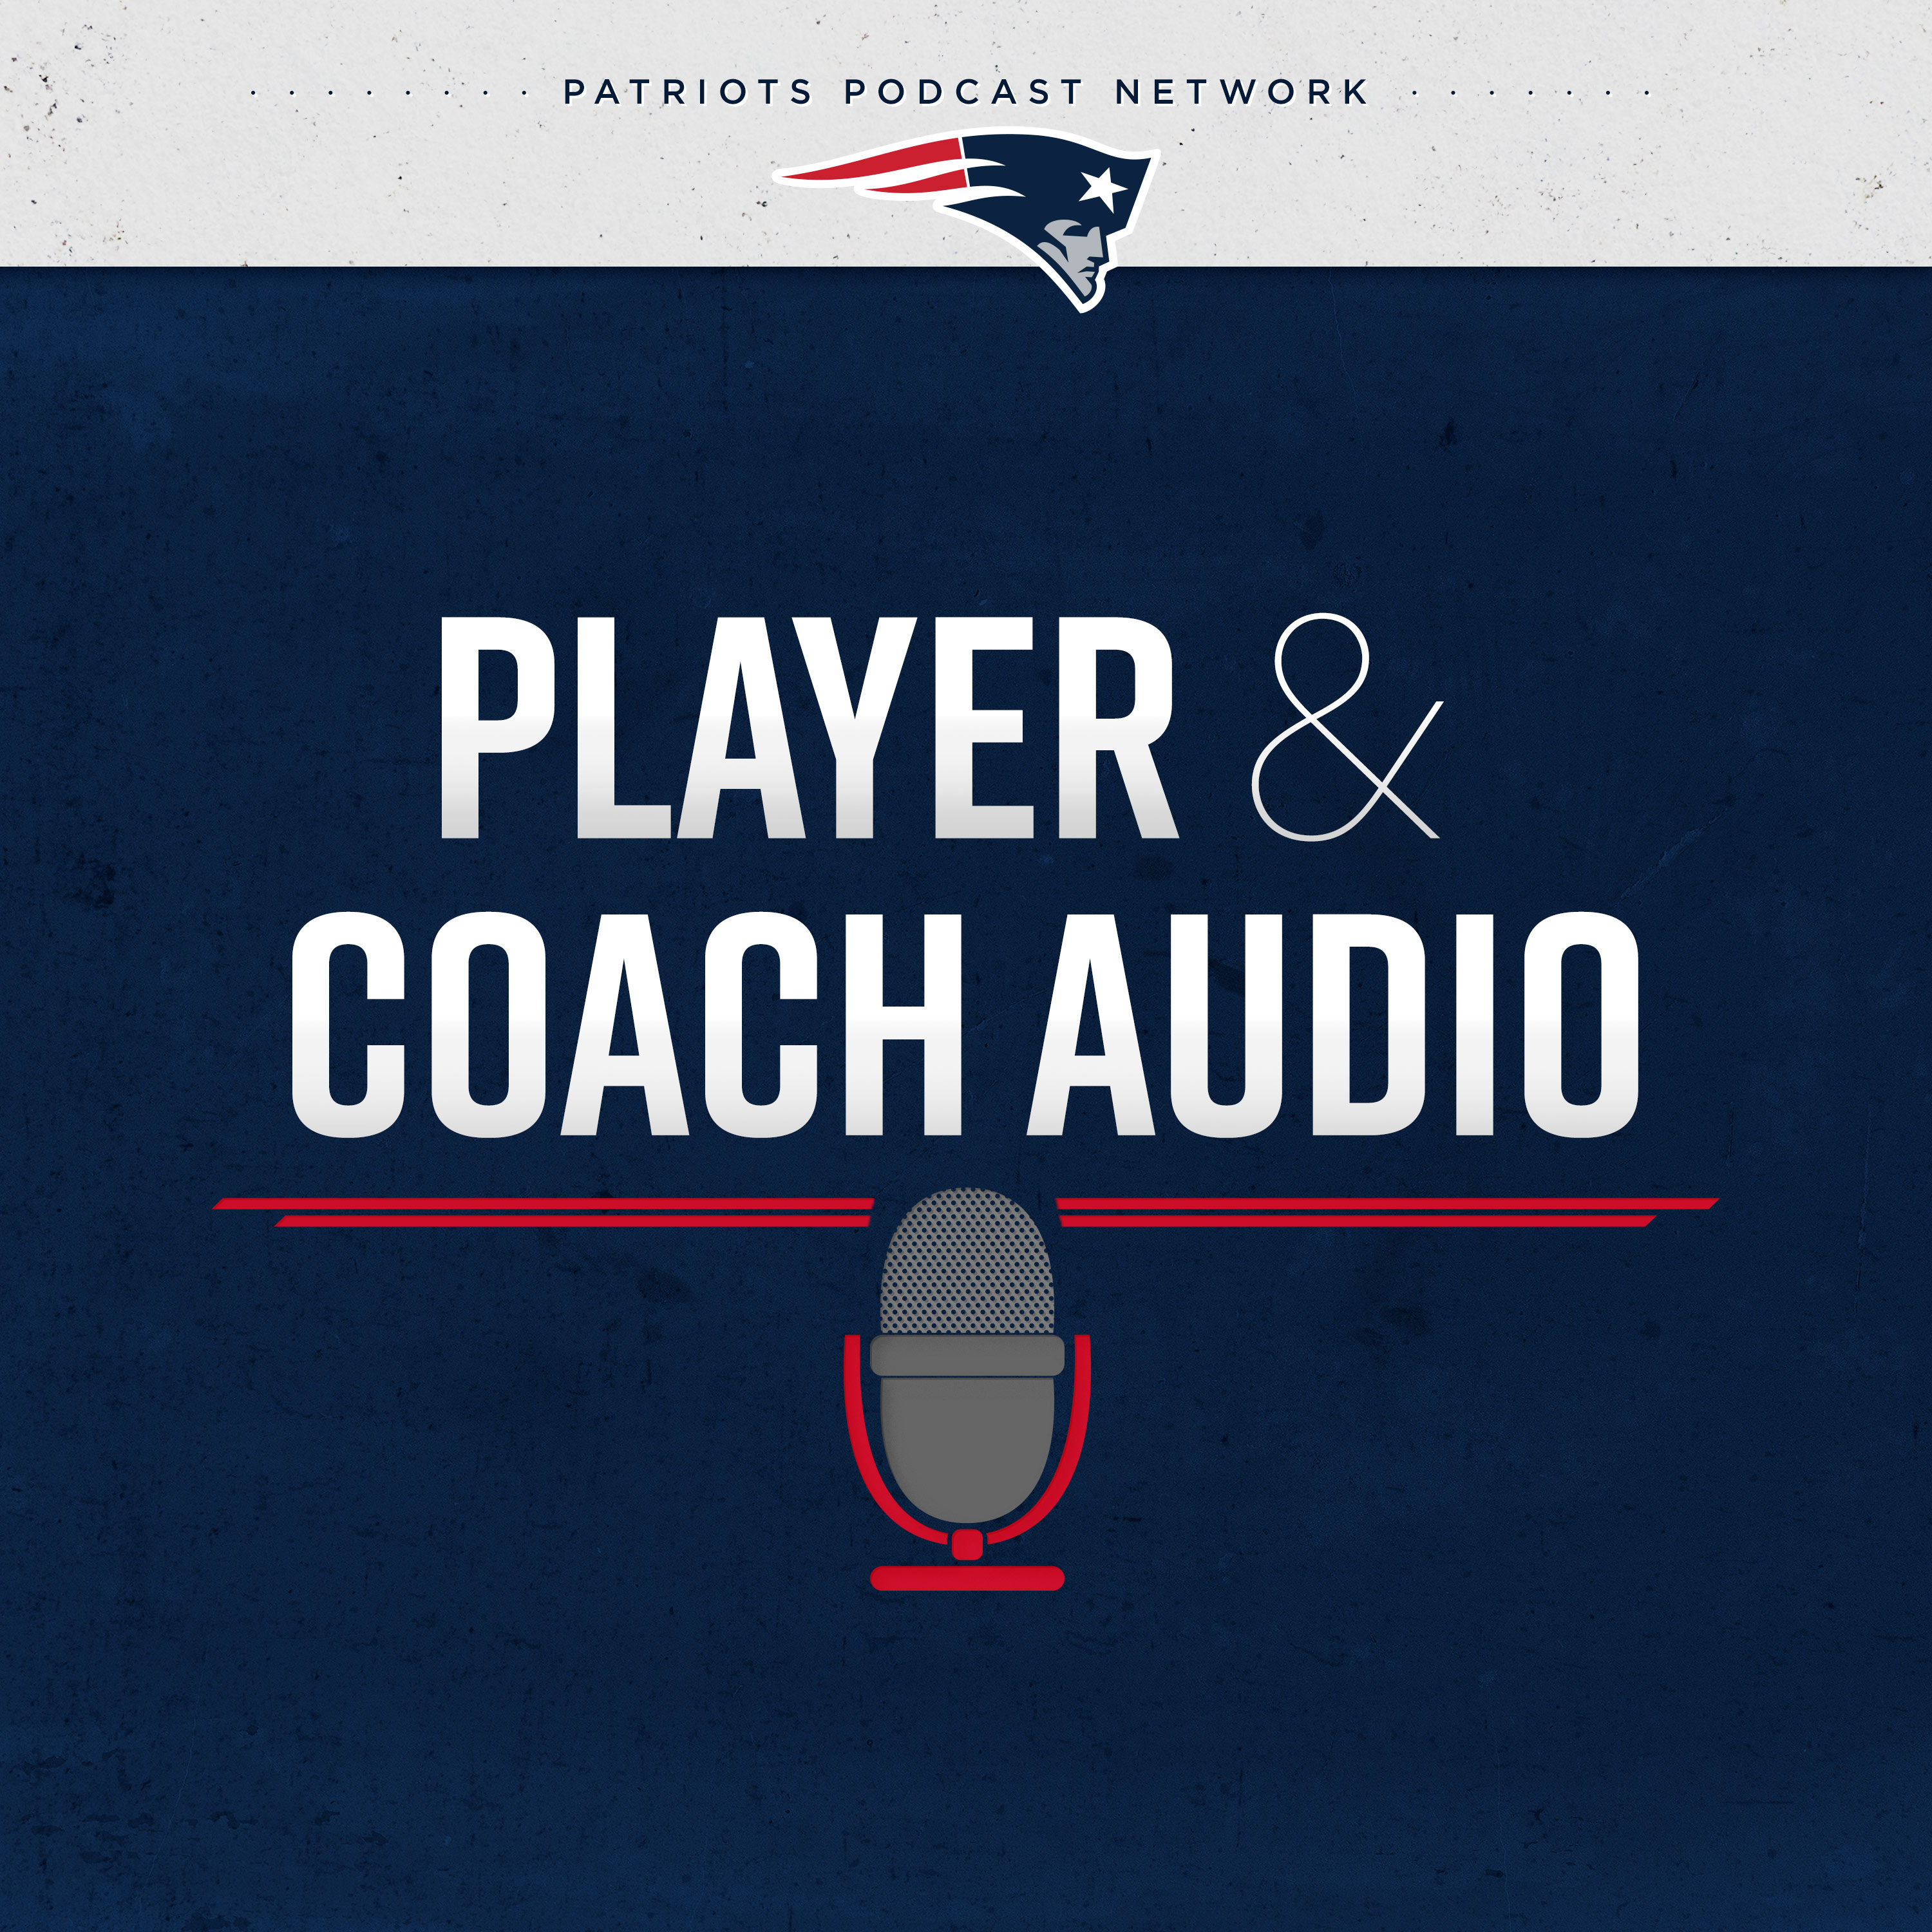 Josh McDaniels 11/22: "We always try to look at some of the things that have given us issues"